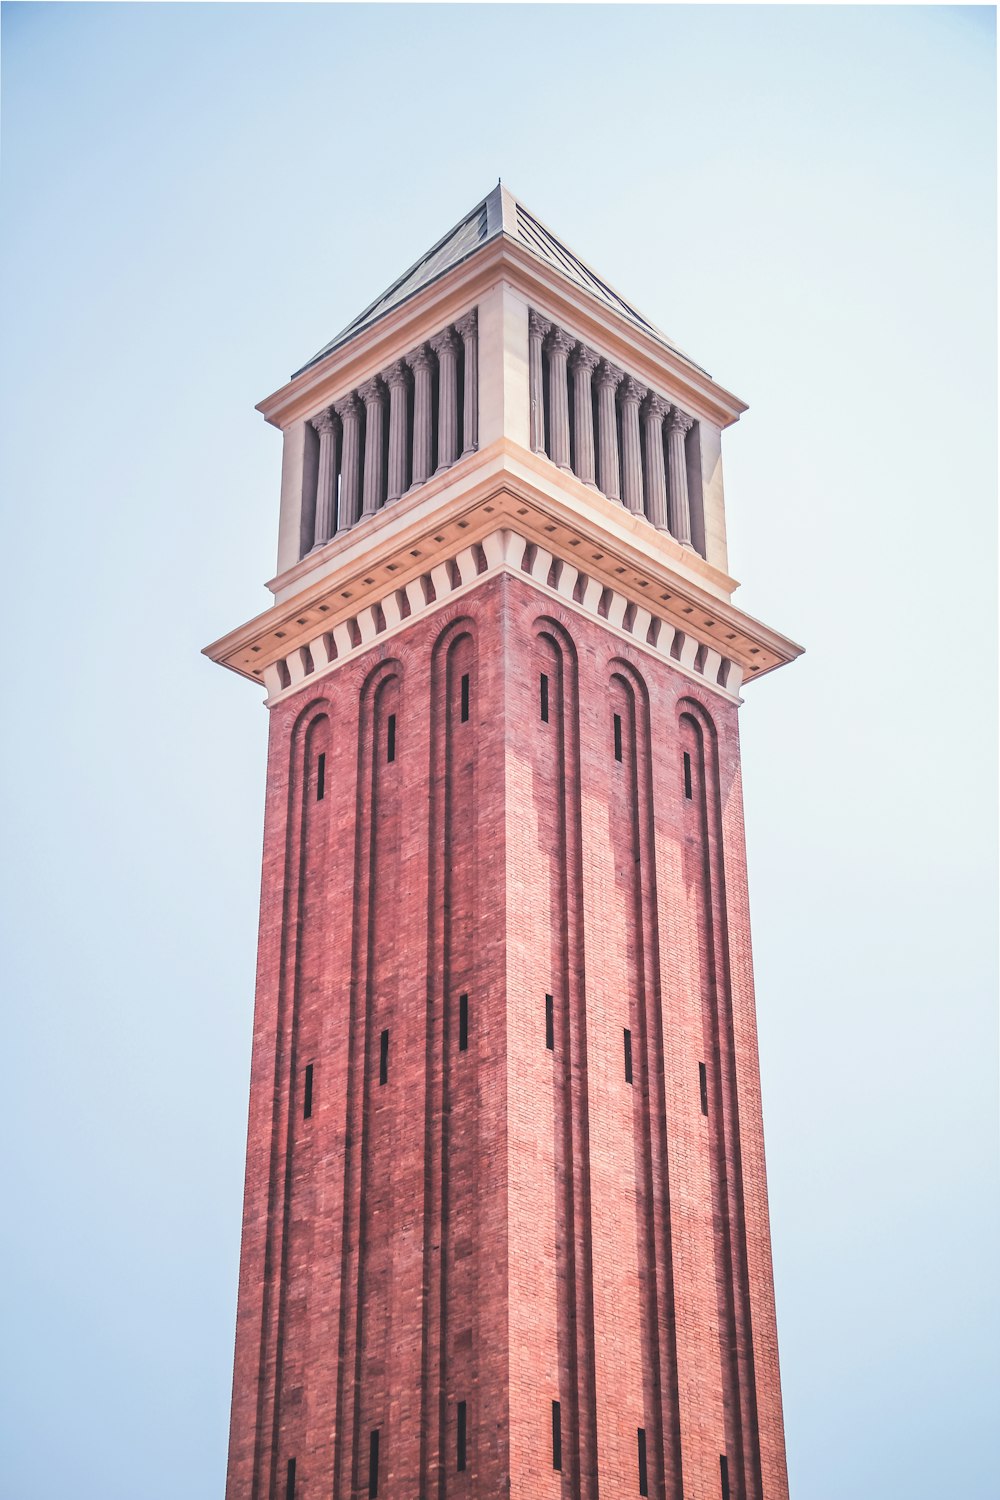 low-angle photography of brown tower under a calm blue sky